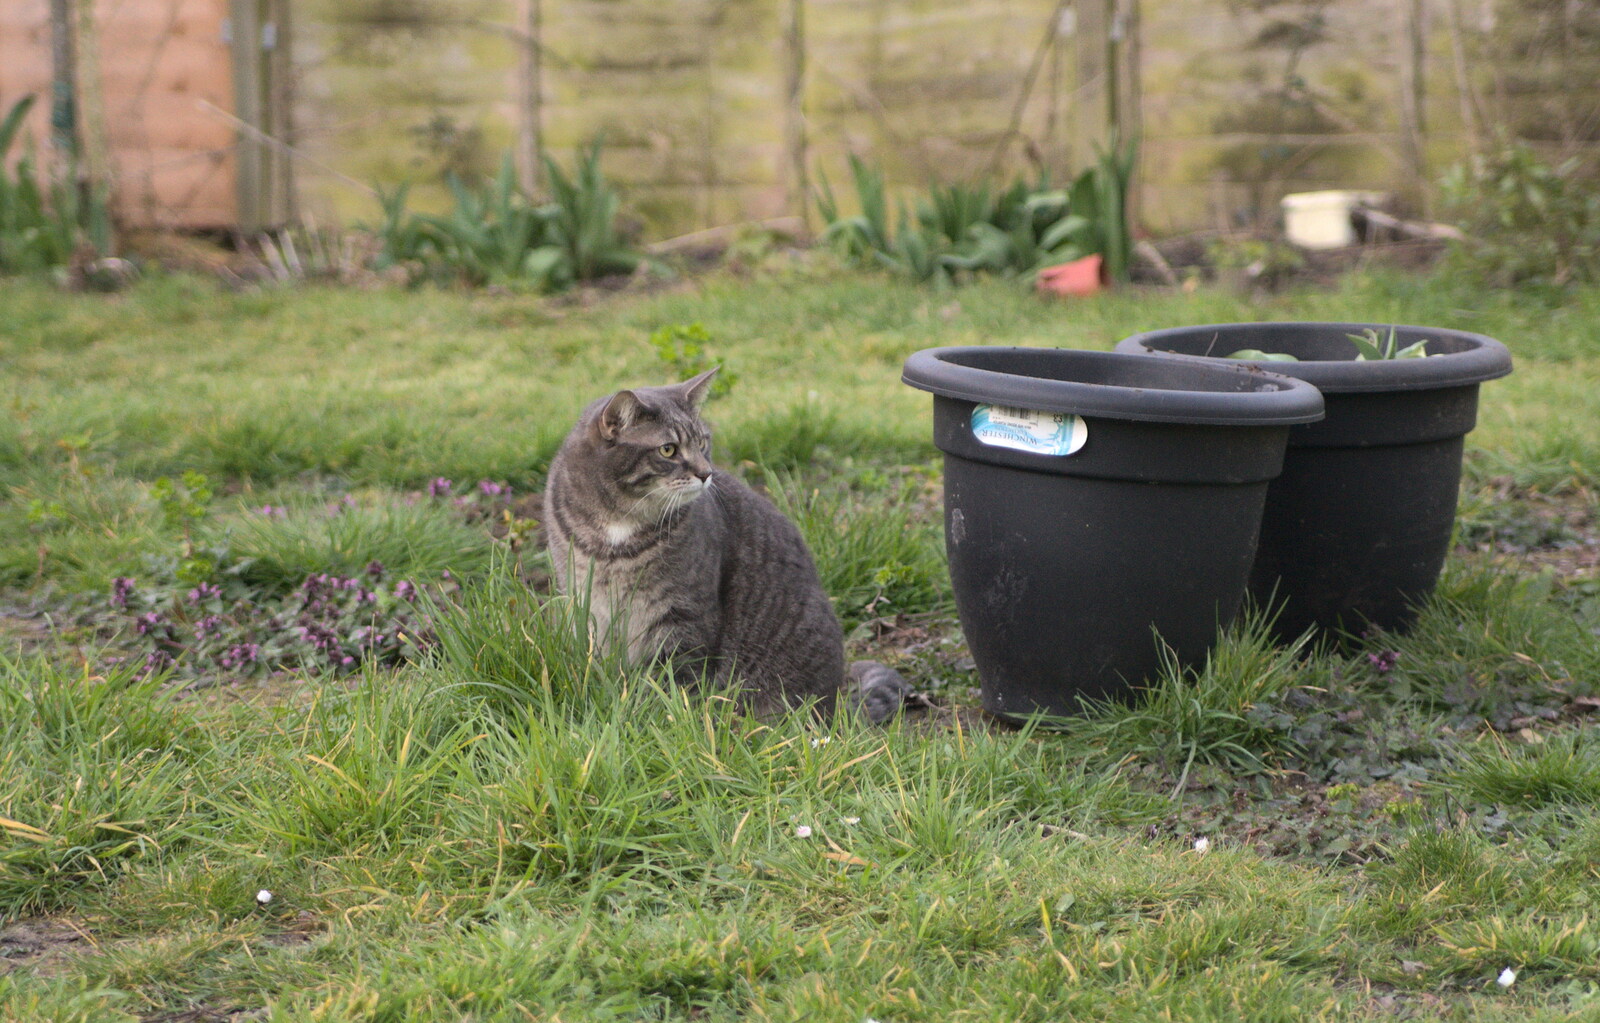 Boris - Stripey Cat - looks around from Emily Comes to Visit, Brome, Suffolk - 15th March 2014